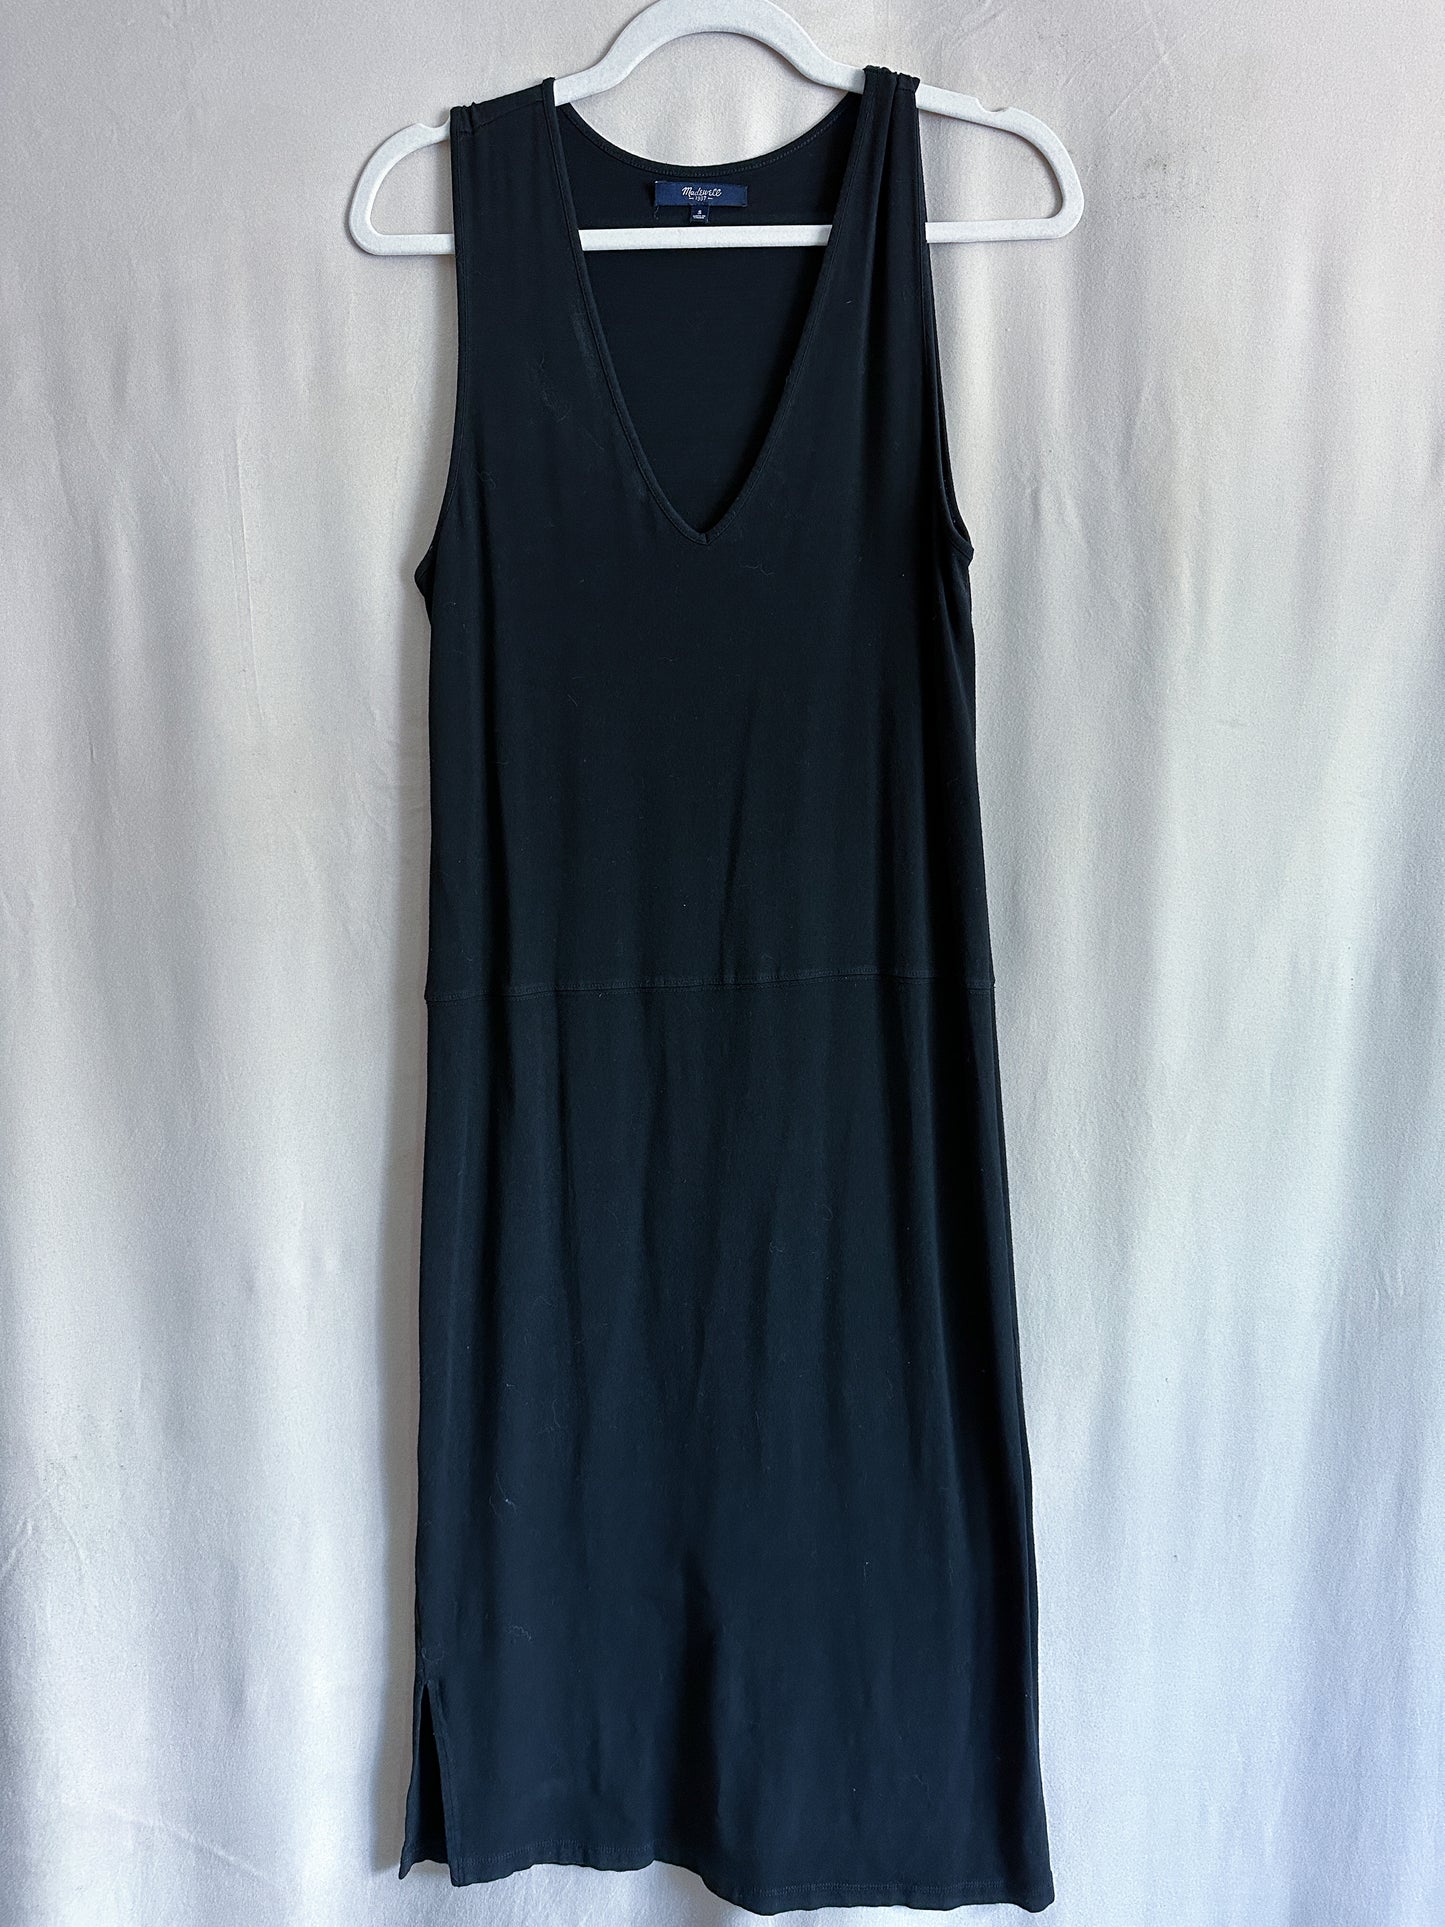 Madewell Black V-neck Fitted Midi Dress (size S)